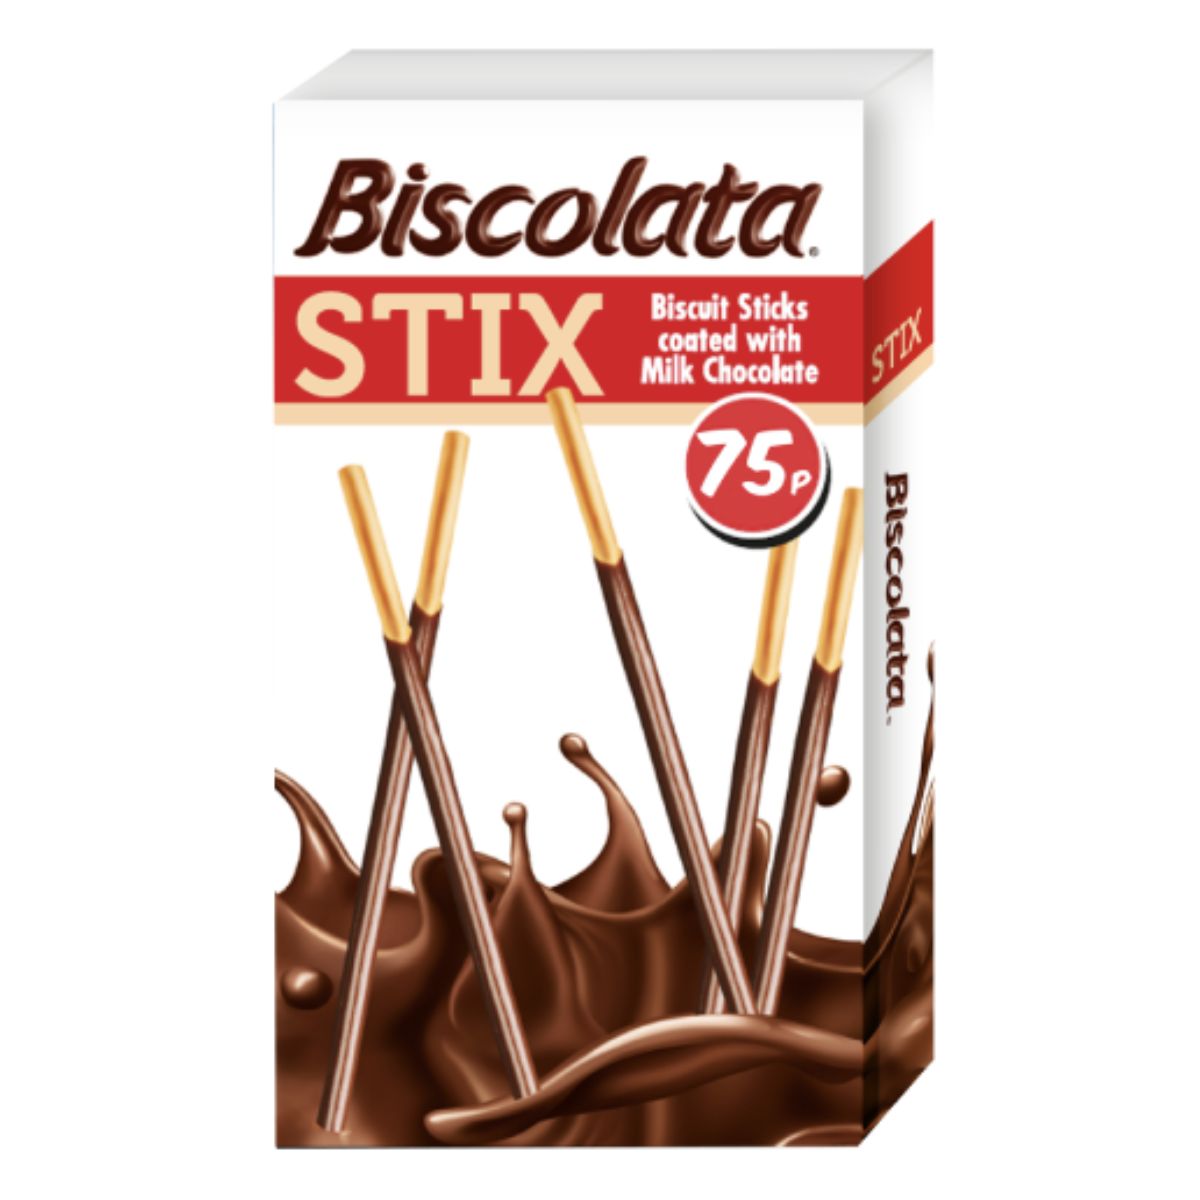 A box of Biscolata - Stix Biscuit Sticks Coated with Milk Chocolate - 32g with a splash of chocolate in the background.